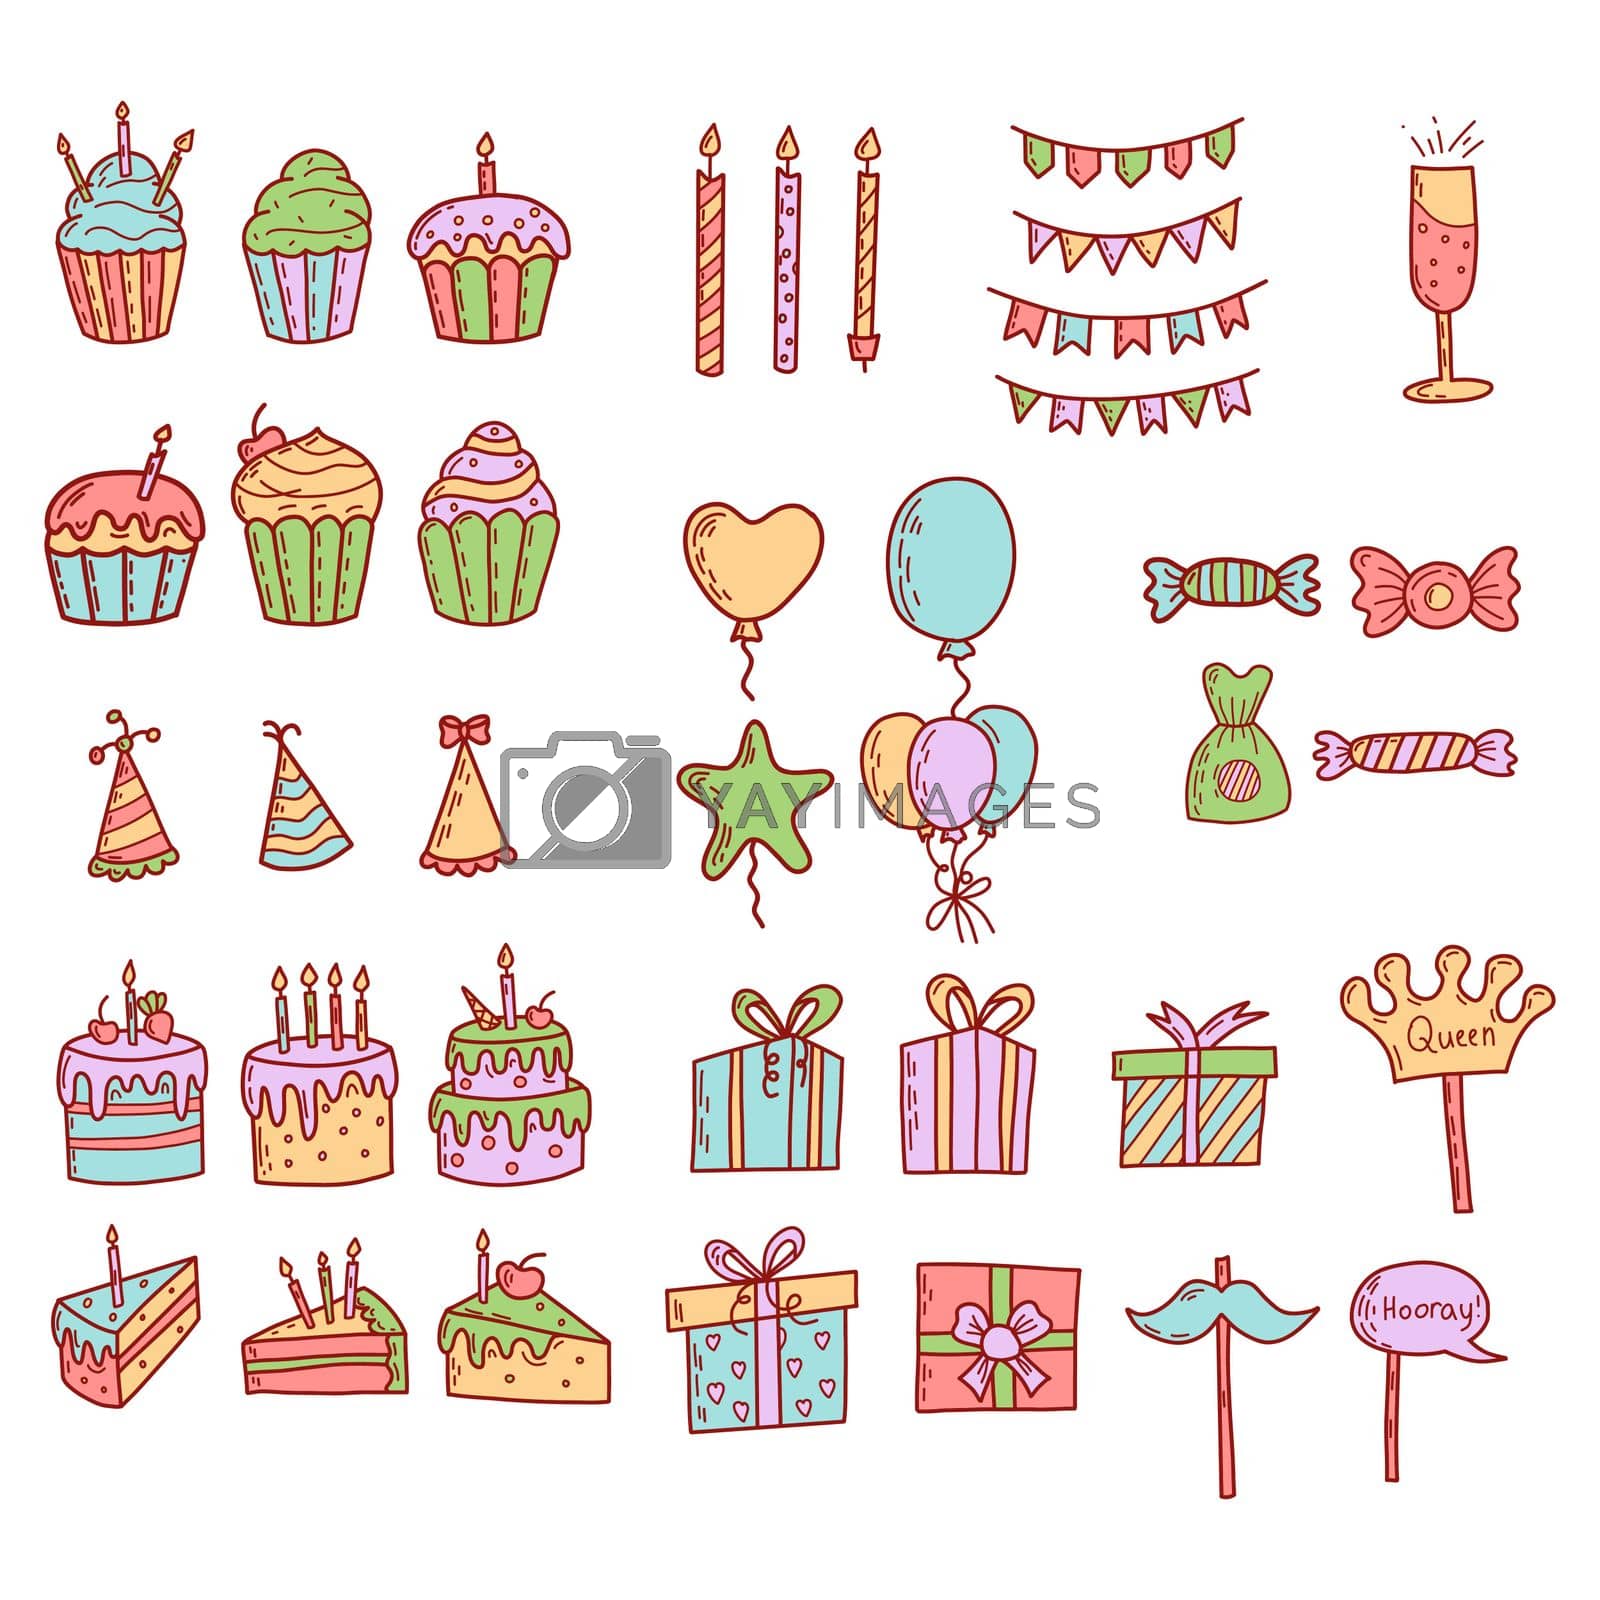 Royalty free image of Birthday greeting party decorations. Gifts presents, cupcakes, celebration cake by anna_orlova